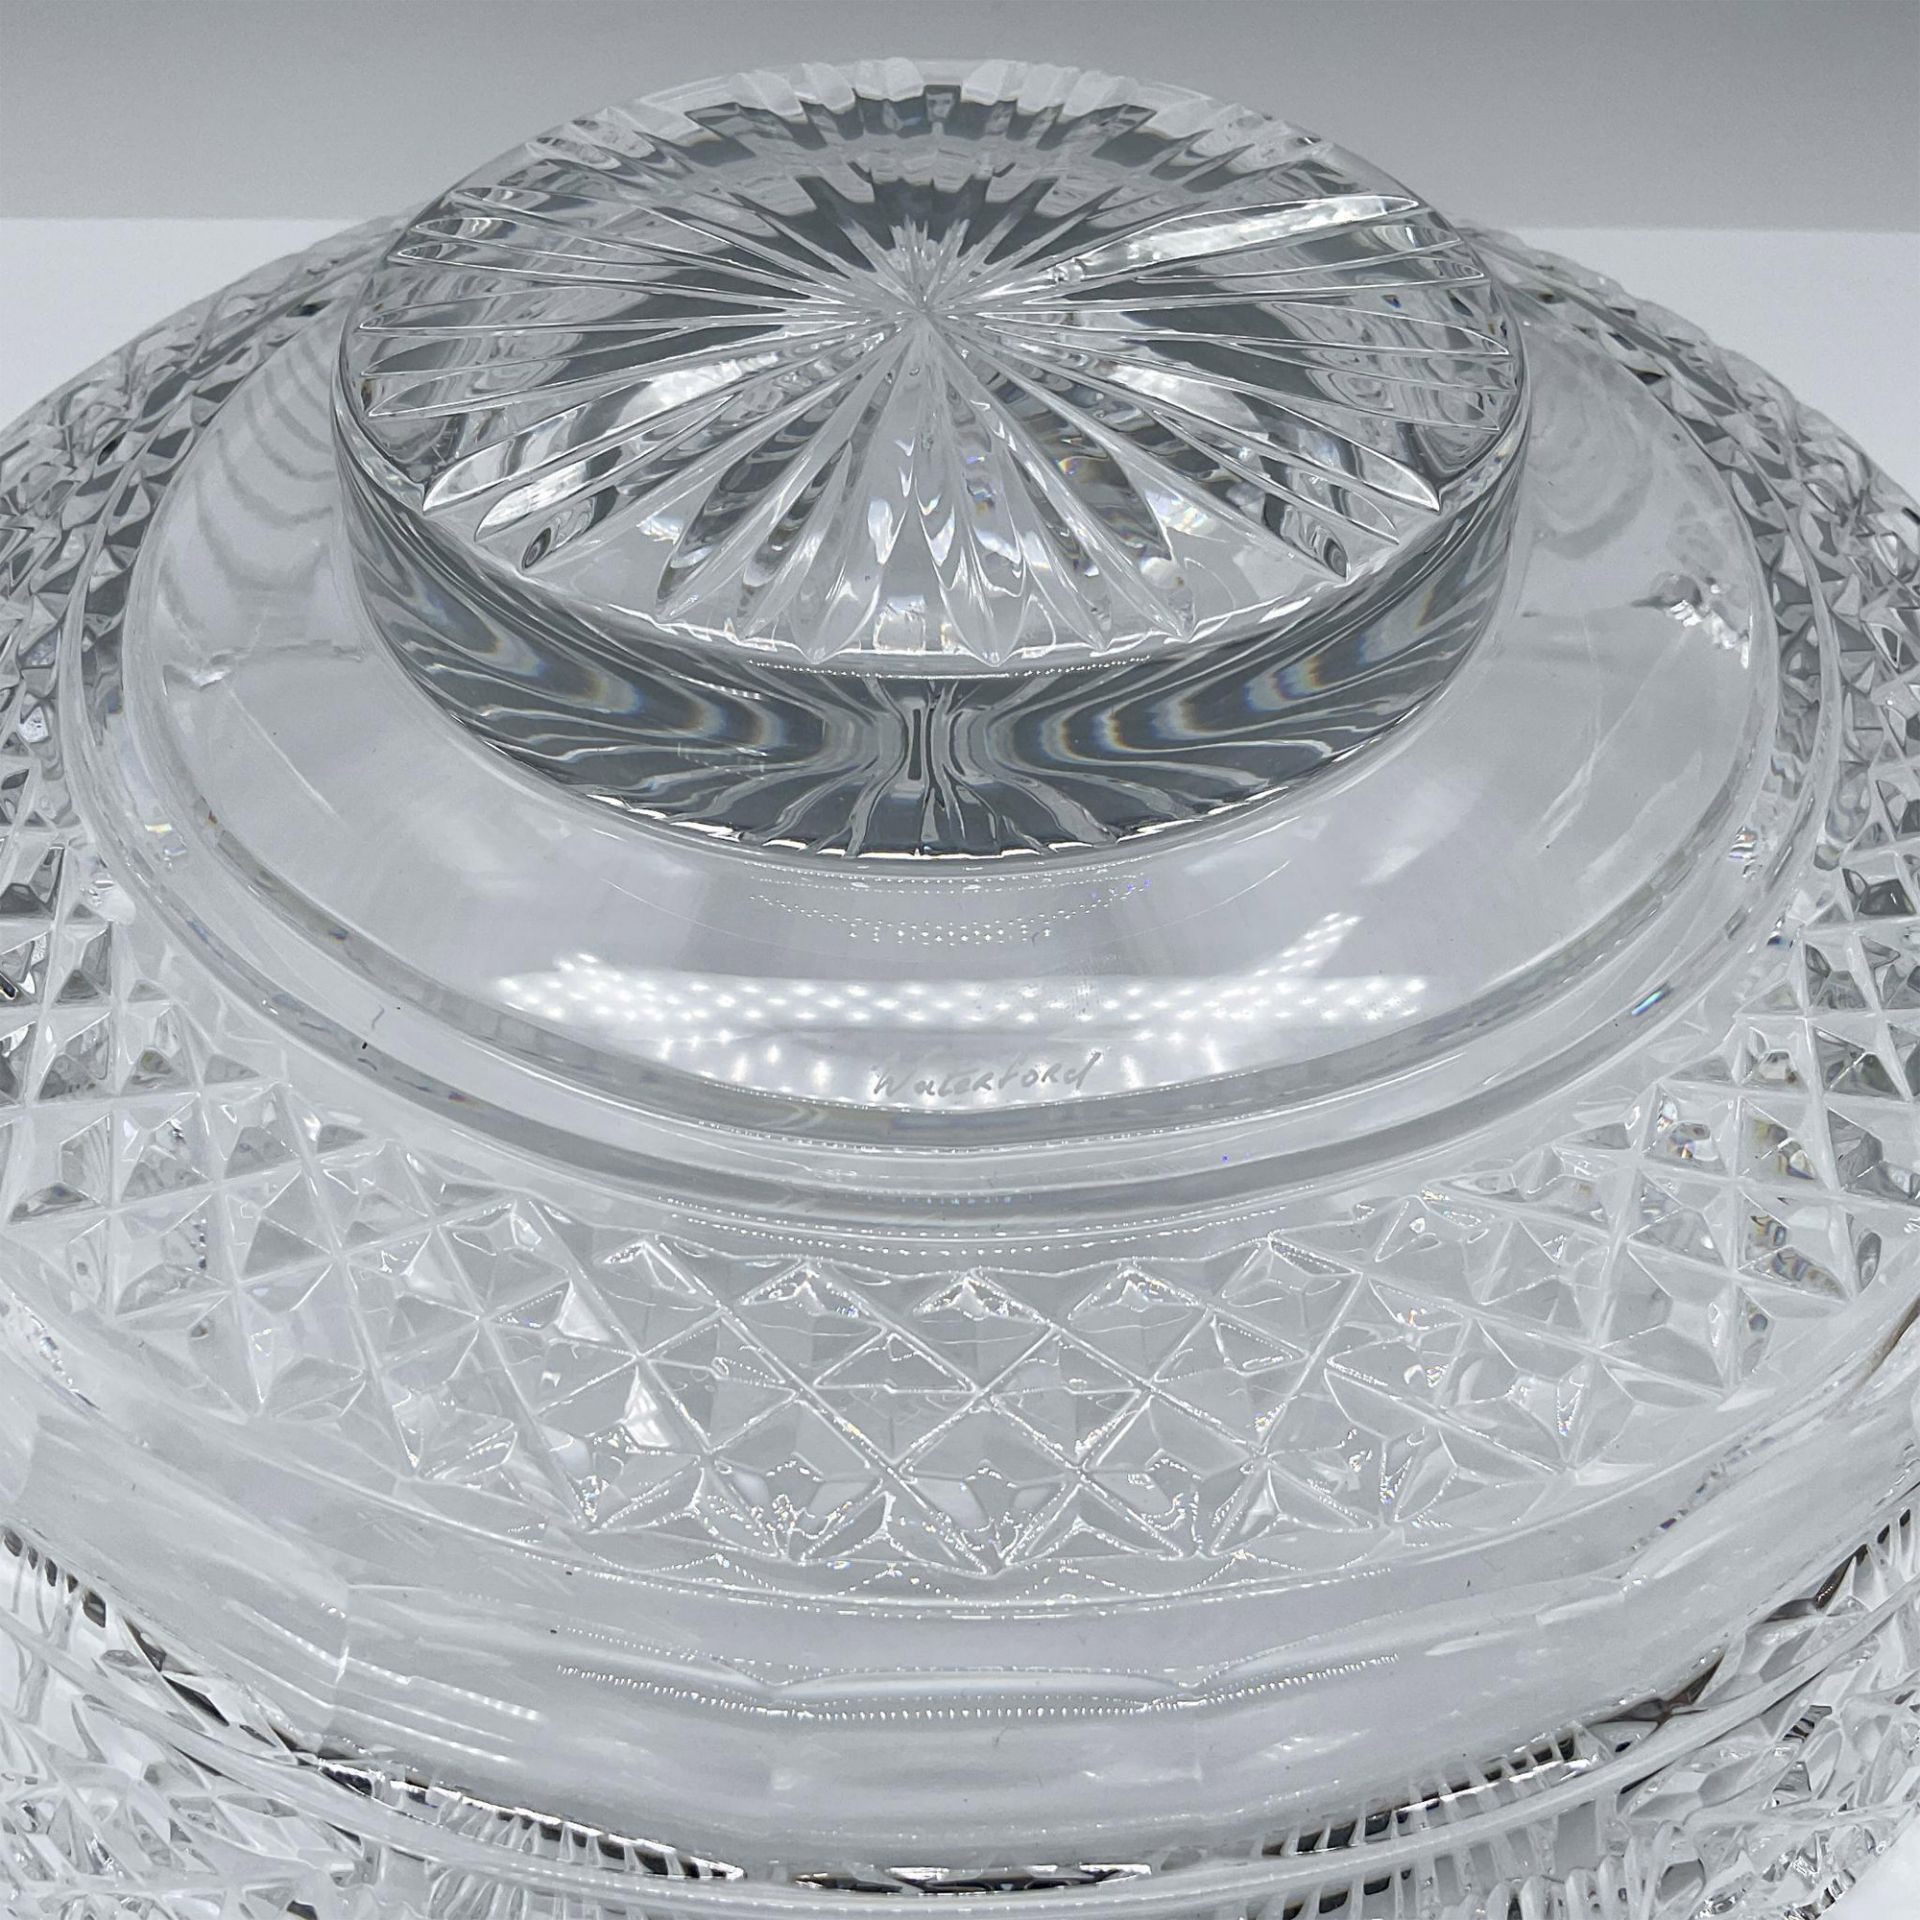 Waterford Crystal Centerpiece Bowl - Image 3 of 5